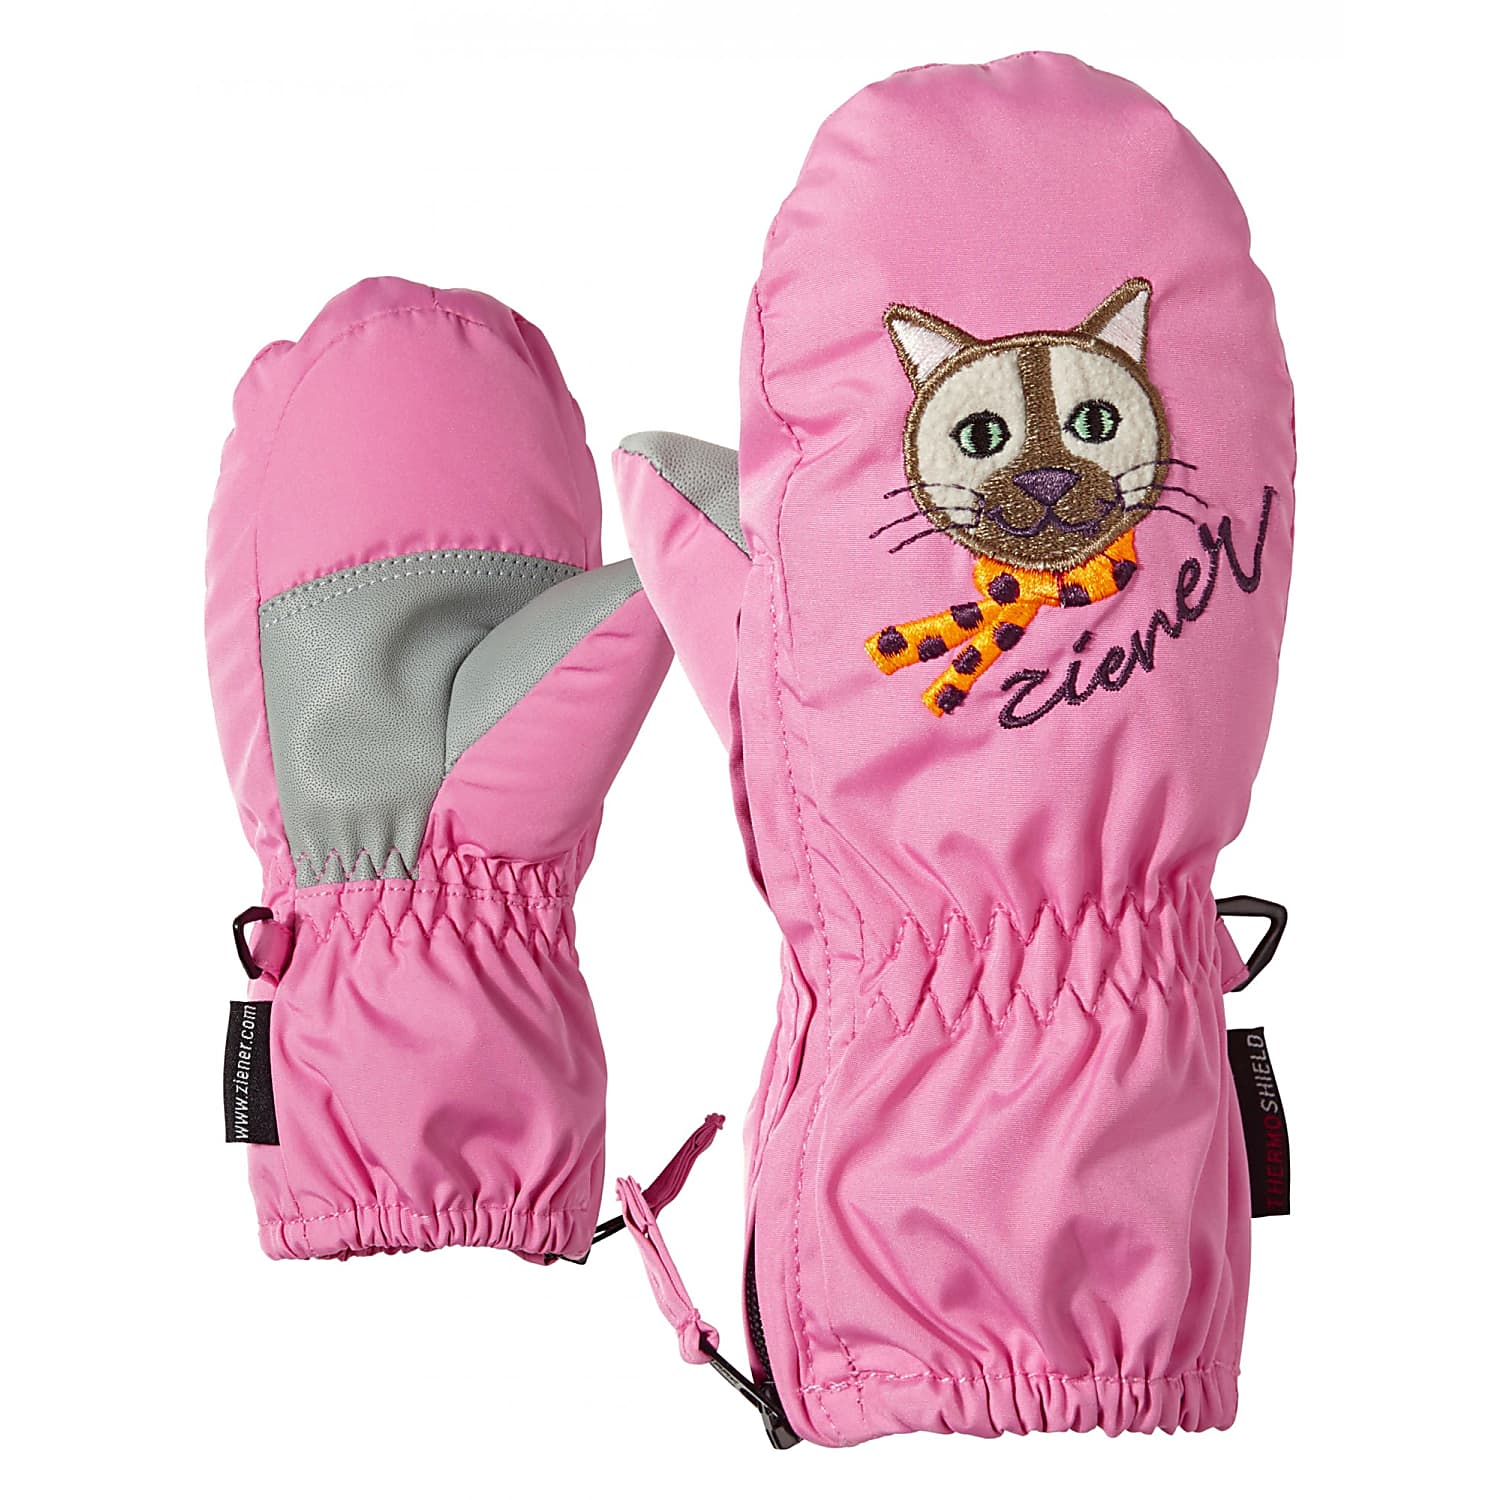 Ziener TODDLER Fast ZOO LE MITTEN, Pink shipping and - Flamingo MINIS cheap